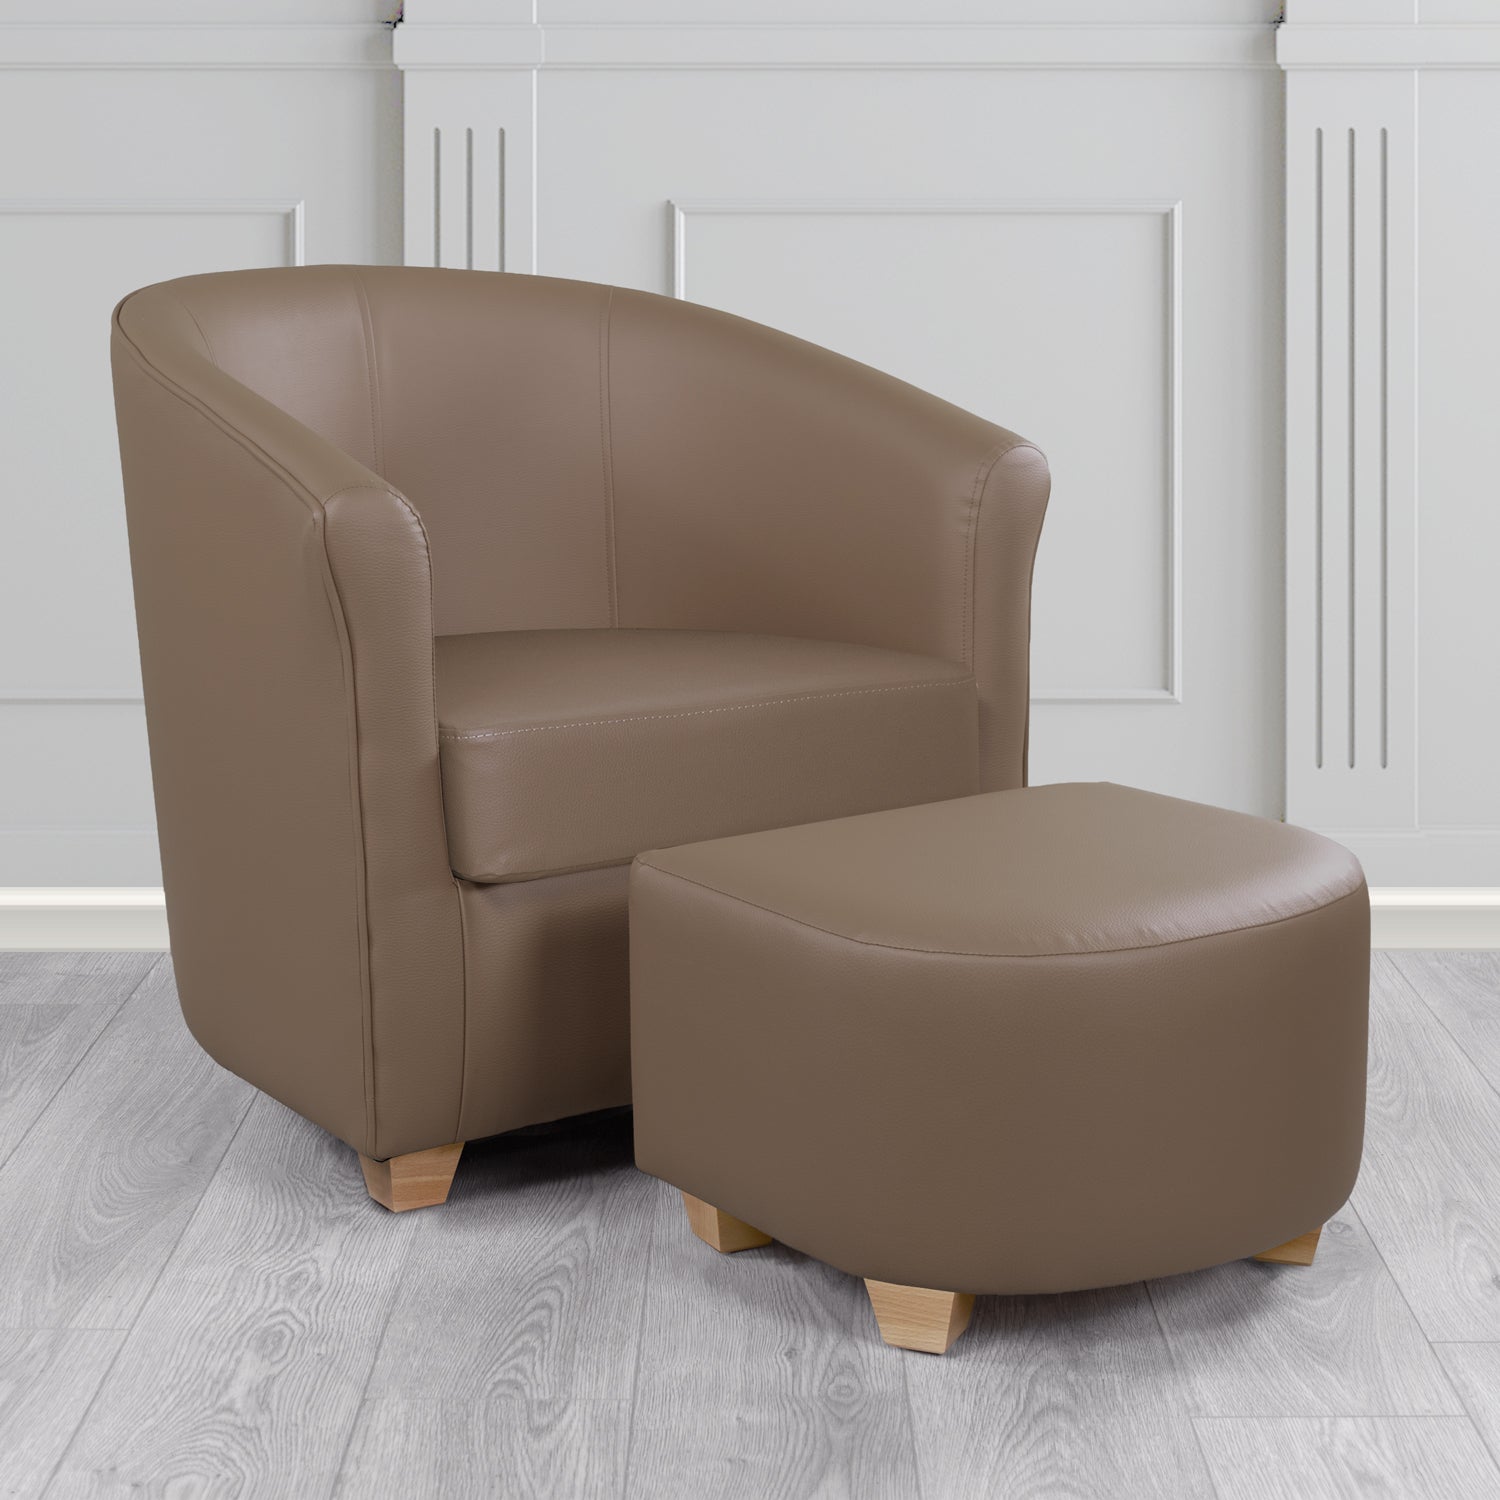 Cannes Tub Chair with Footstool Set in Just Colour Pecan Crib 5 Faux Leather - The Tub Chair Shop